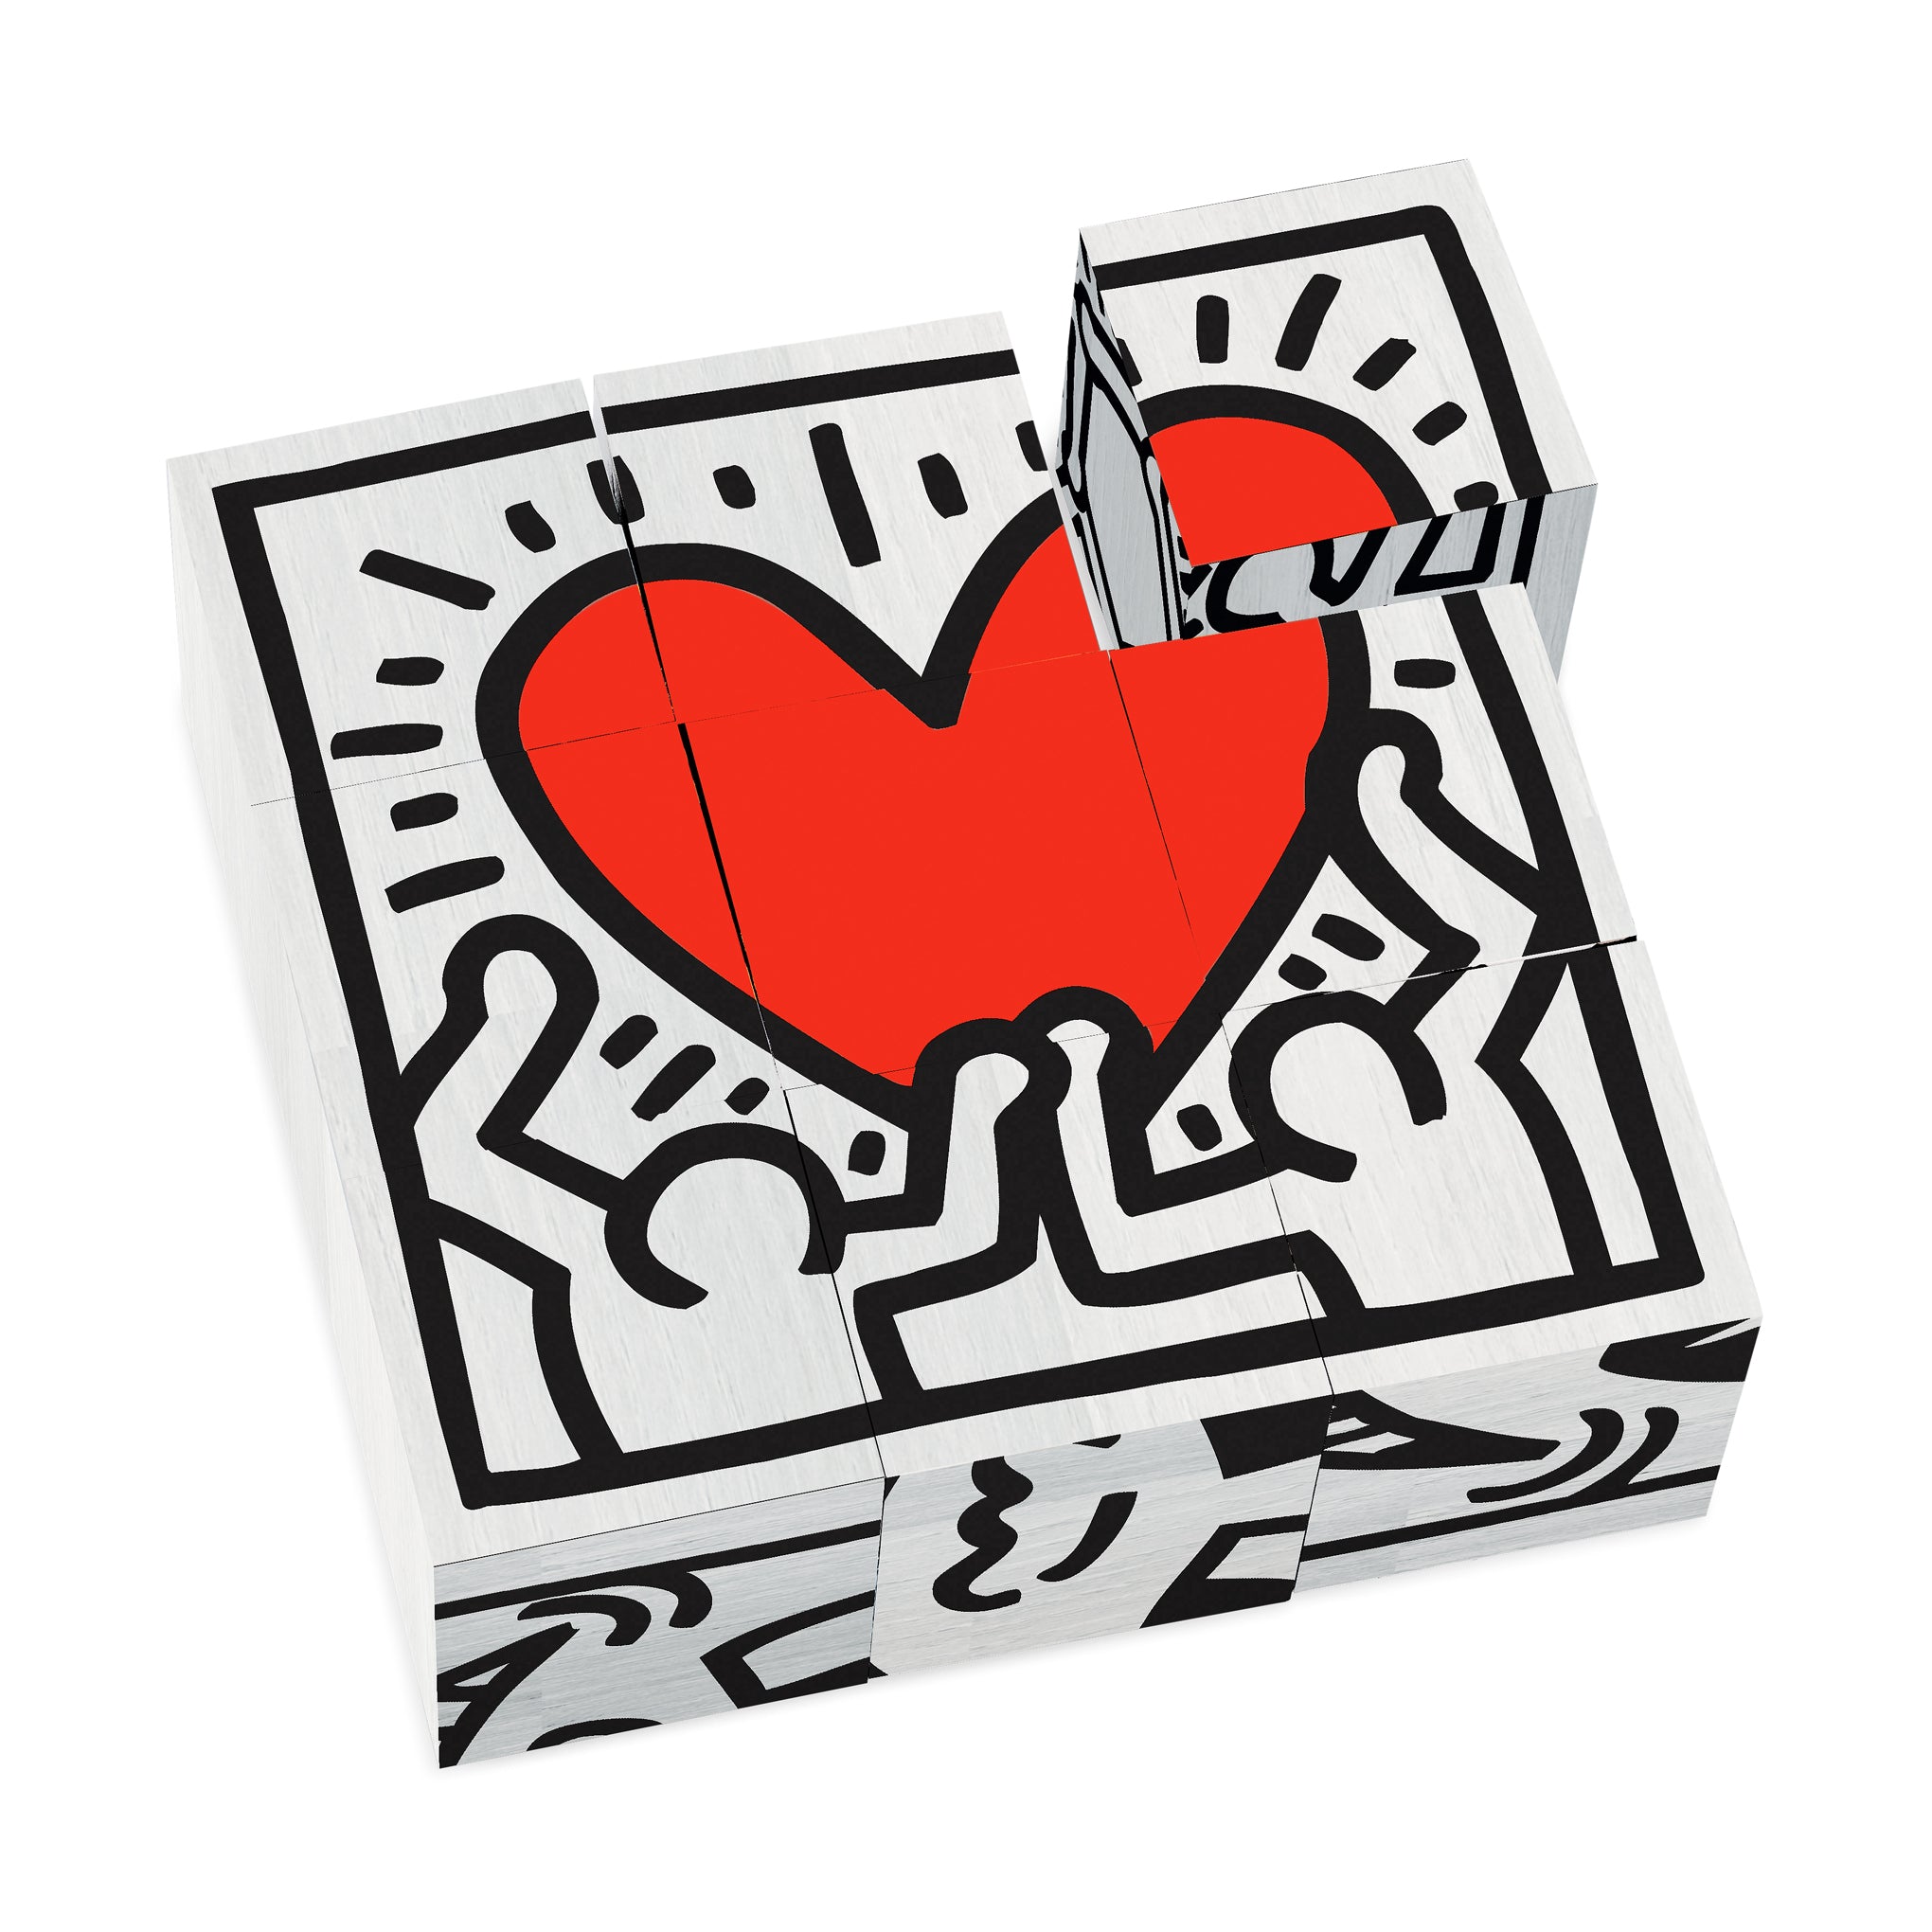 Keith Haring Wooden Block Puzzle